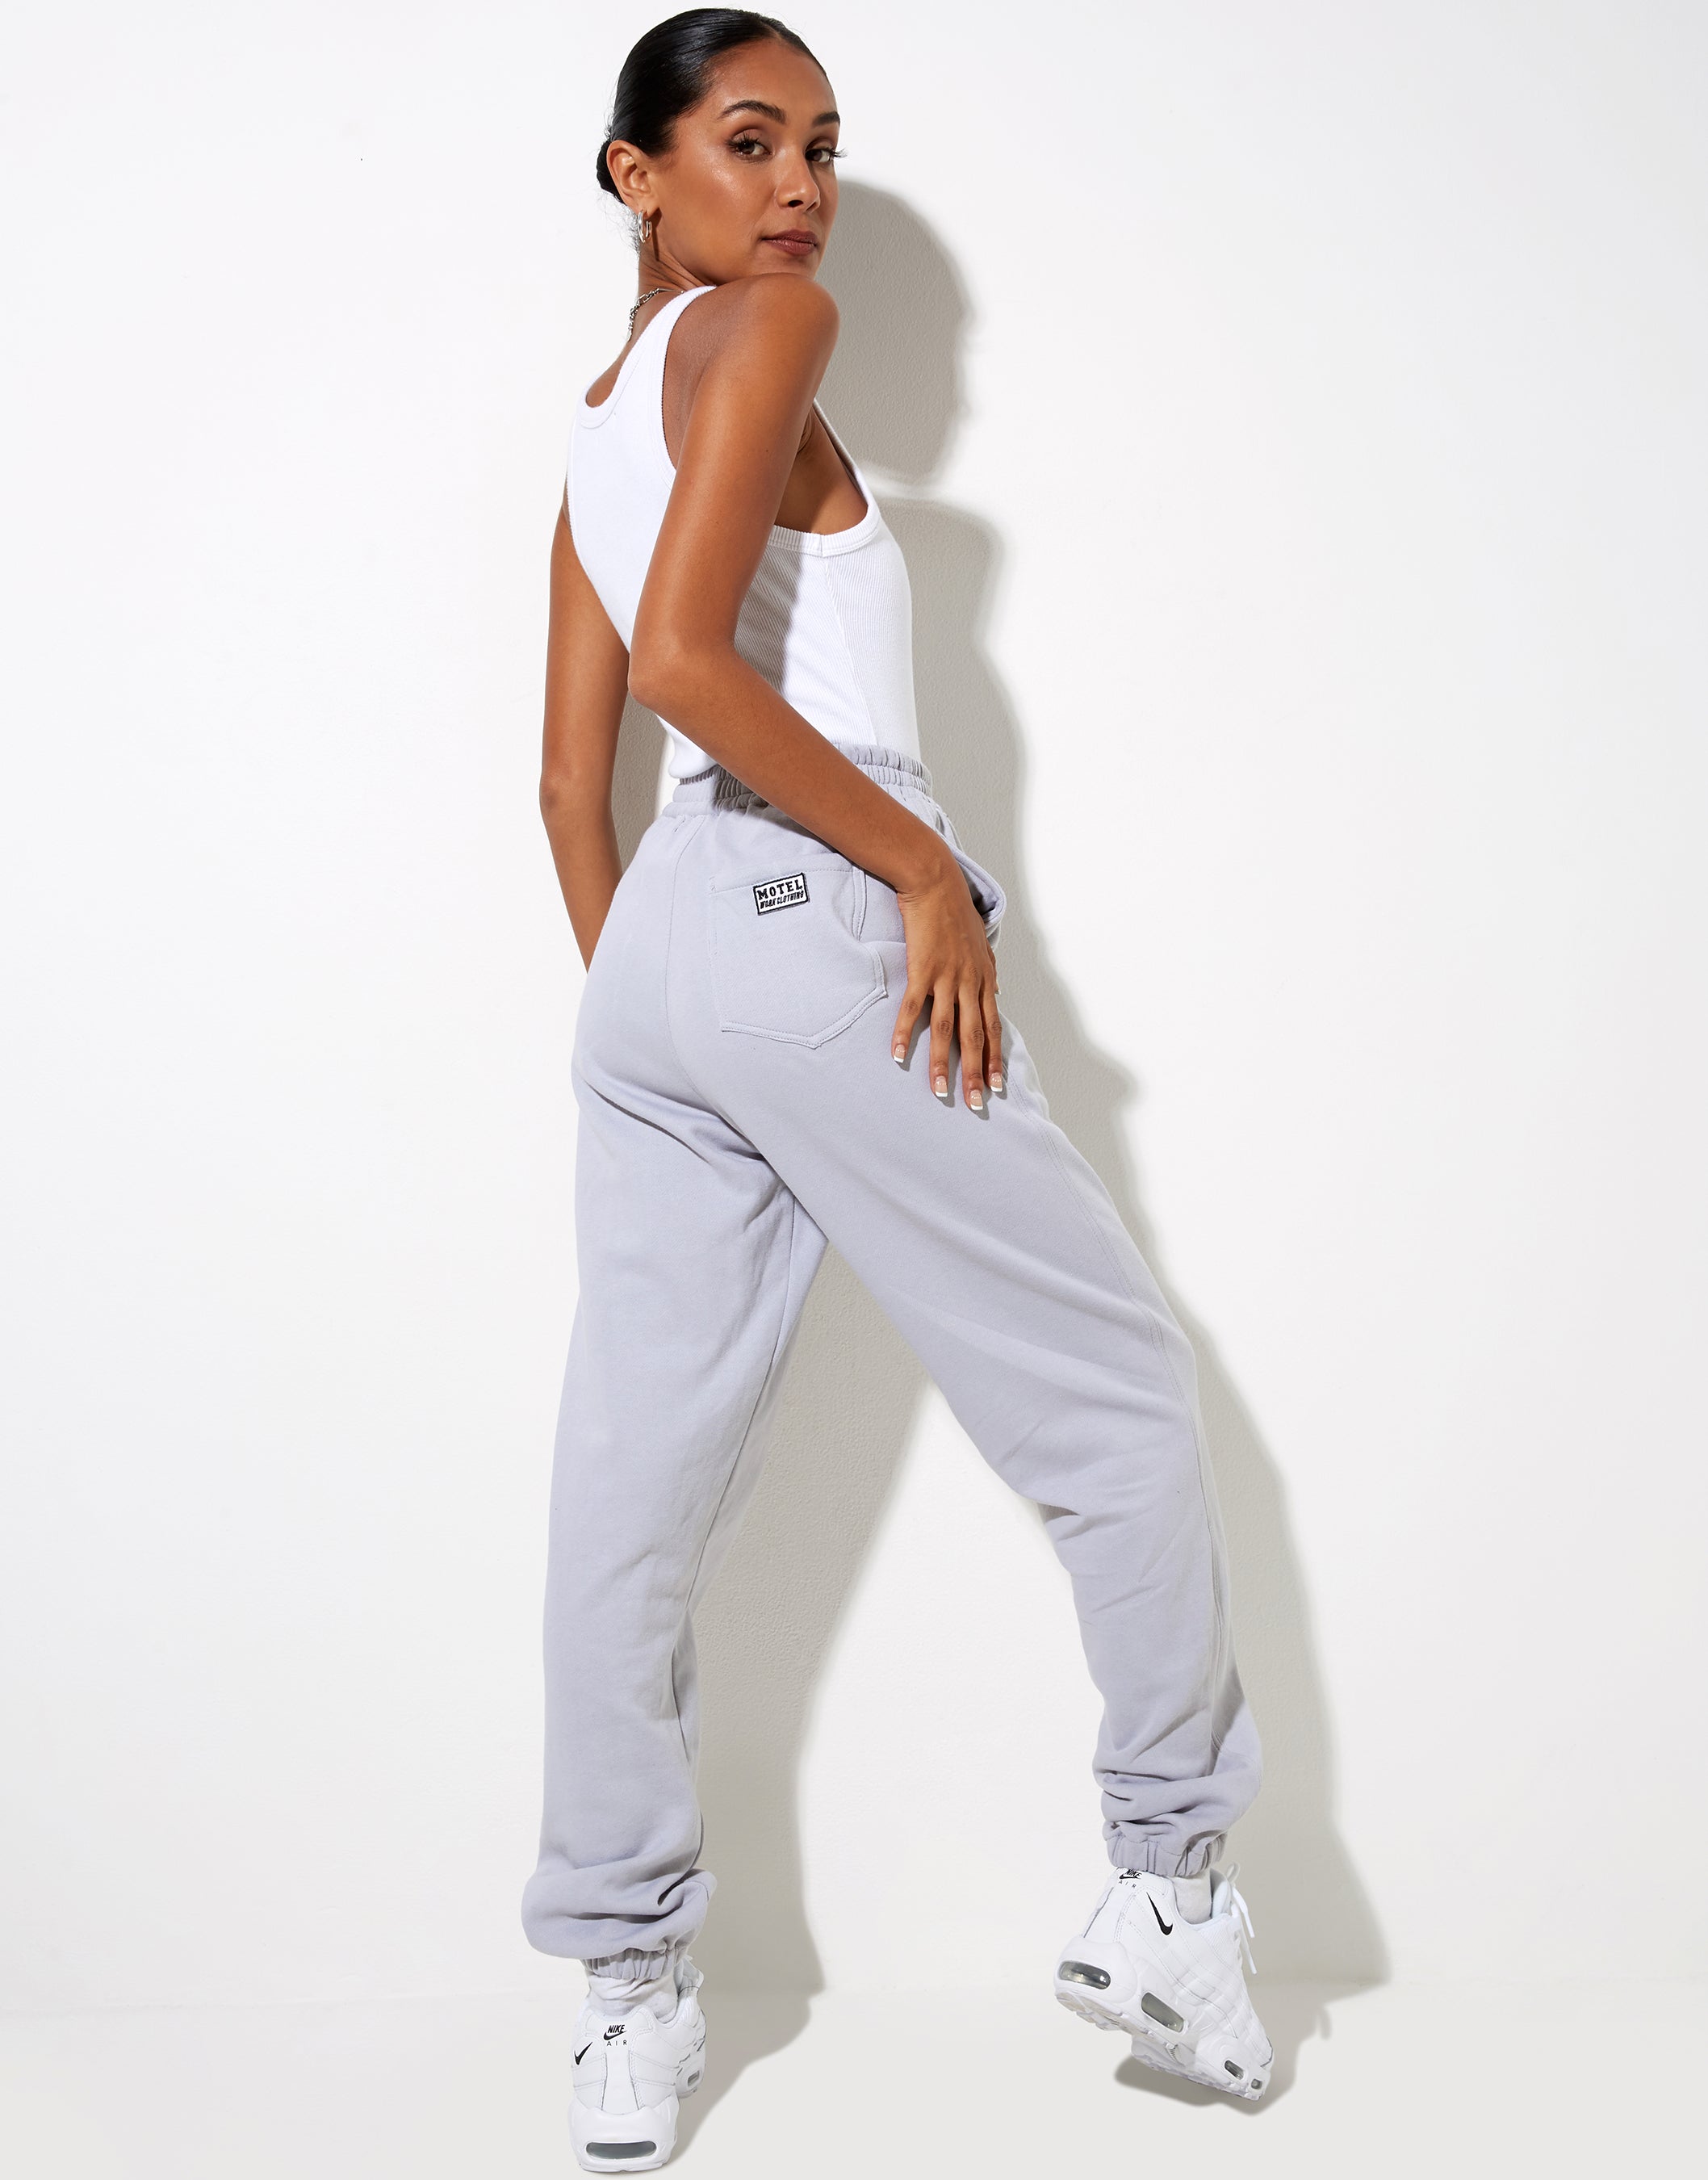 Image of Bamal Jogger in Lunar Rock with Motel Work Clothing Label Embro